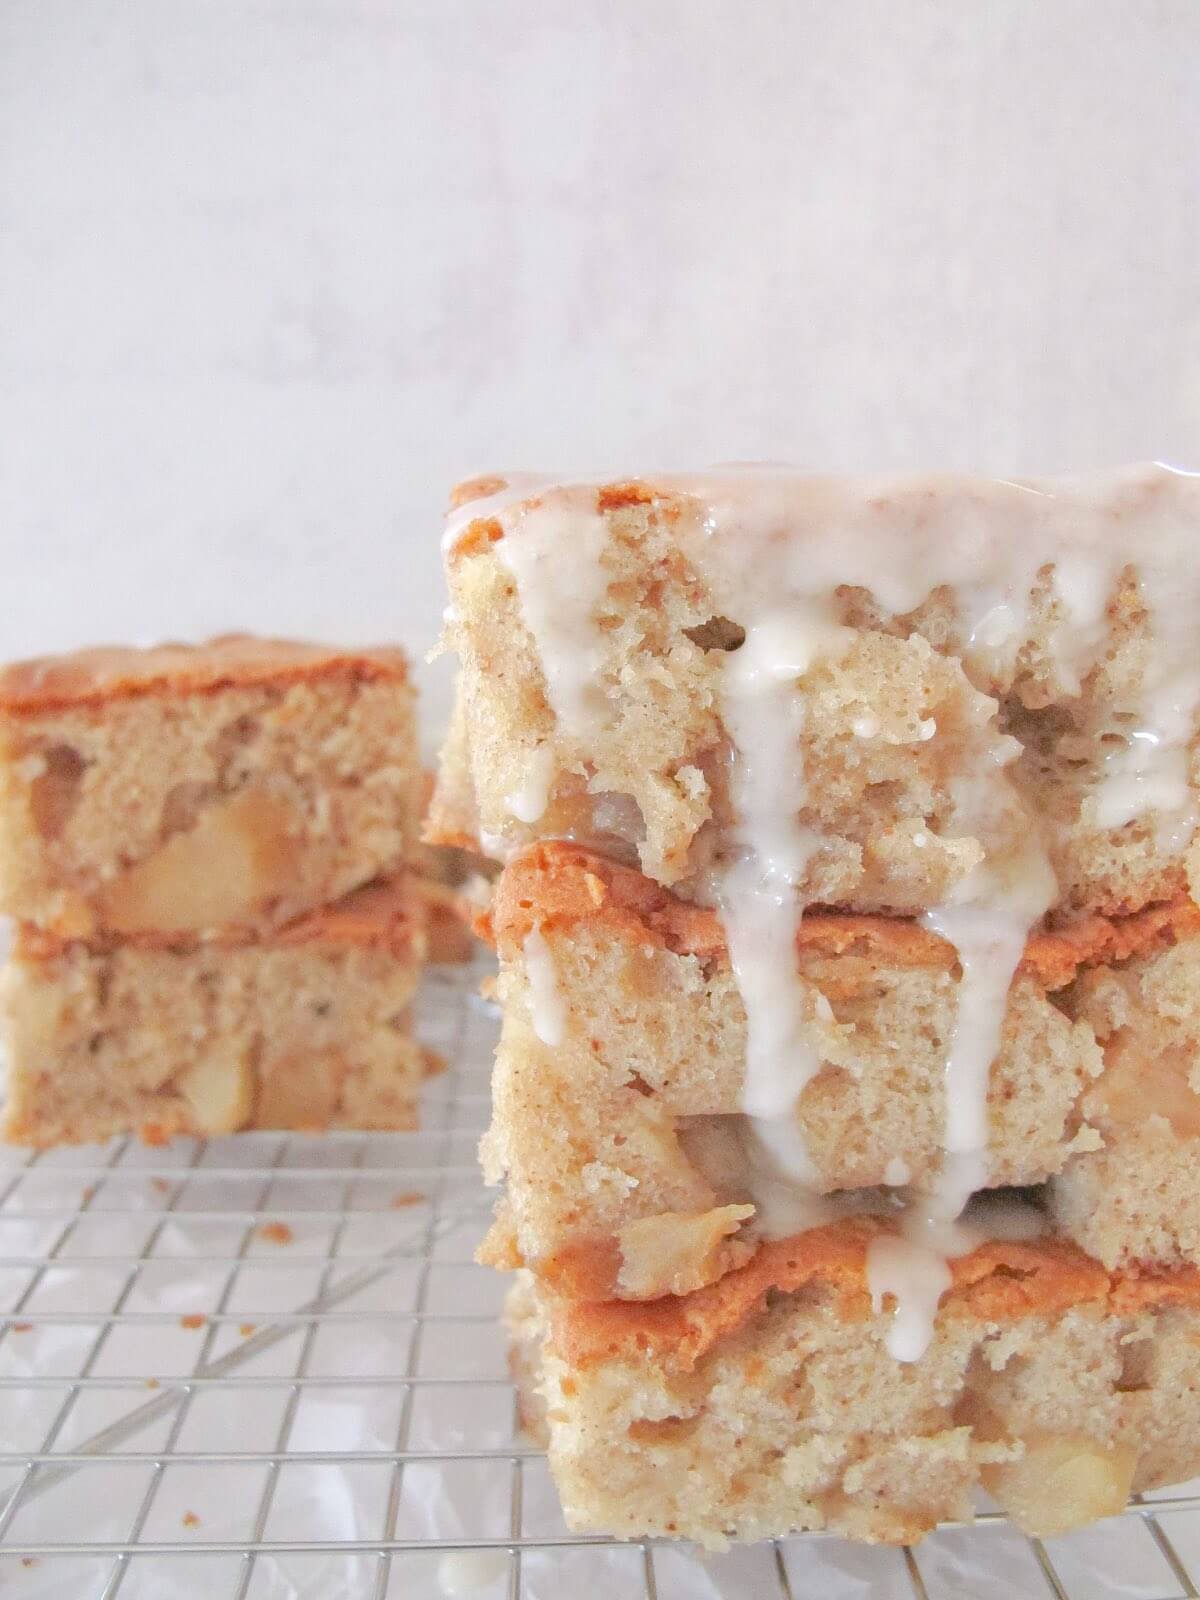 Three pieces of apple cake stacked on top of each other and topped with icing sugar.